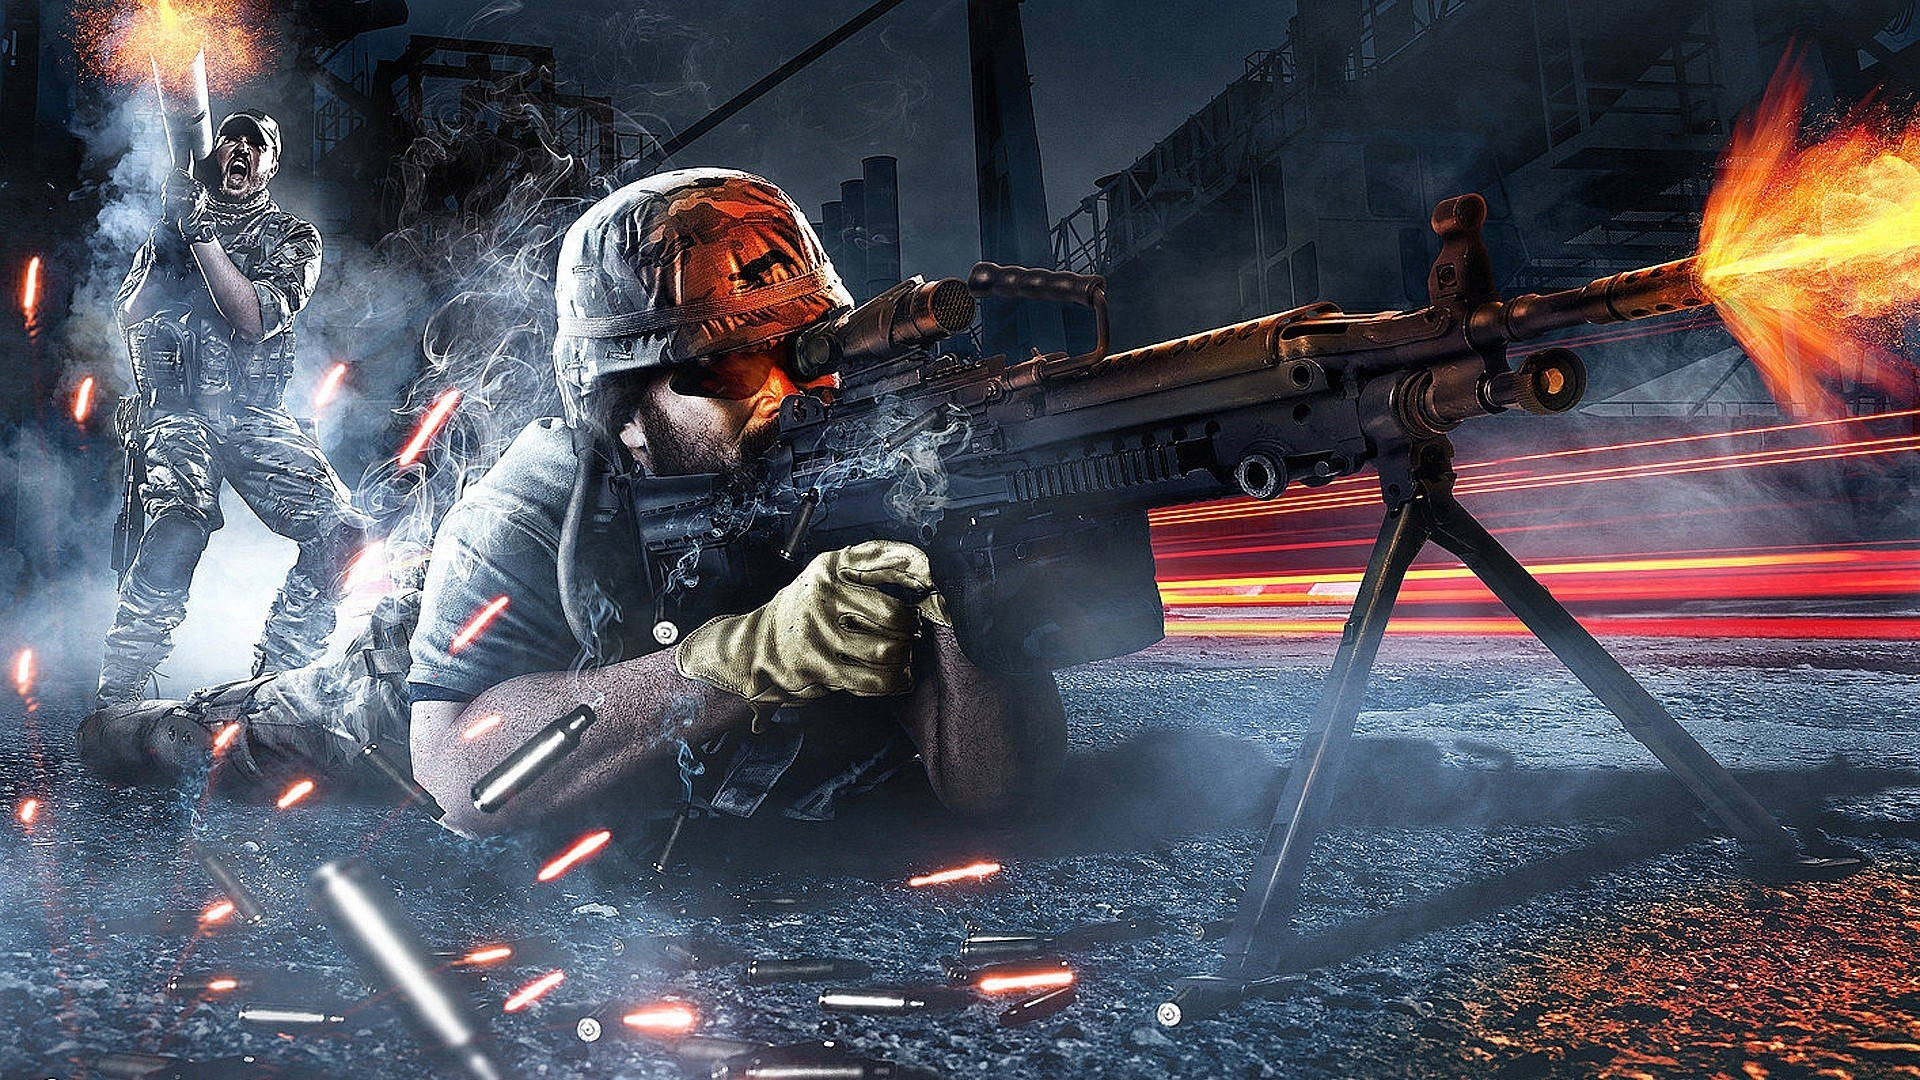 Experience the Coolest Battlefield Action with Battlefield 3 Wallpaper